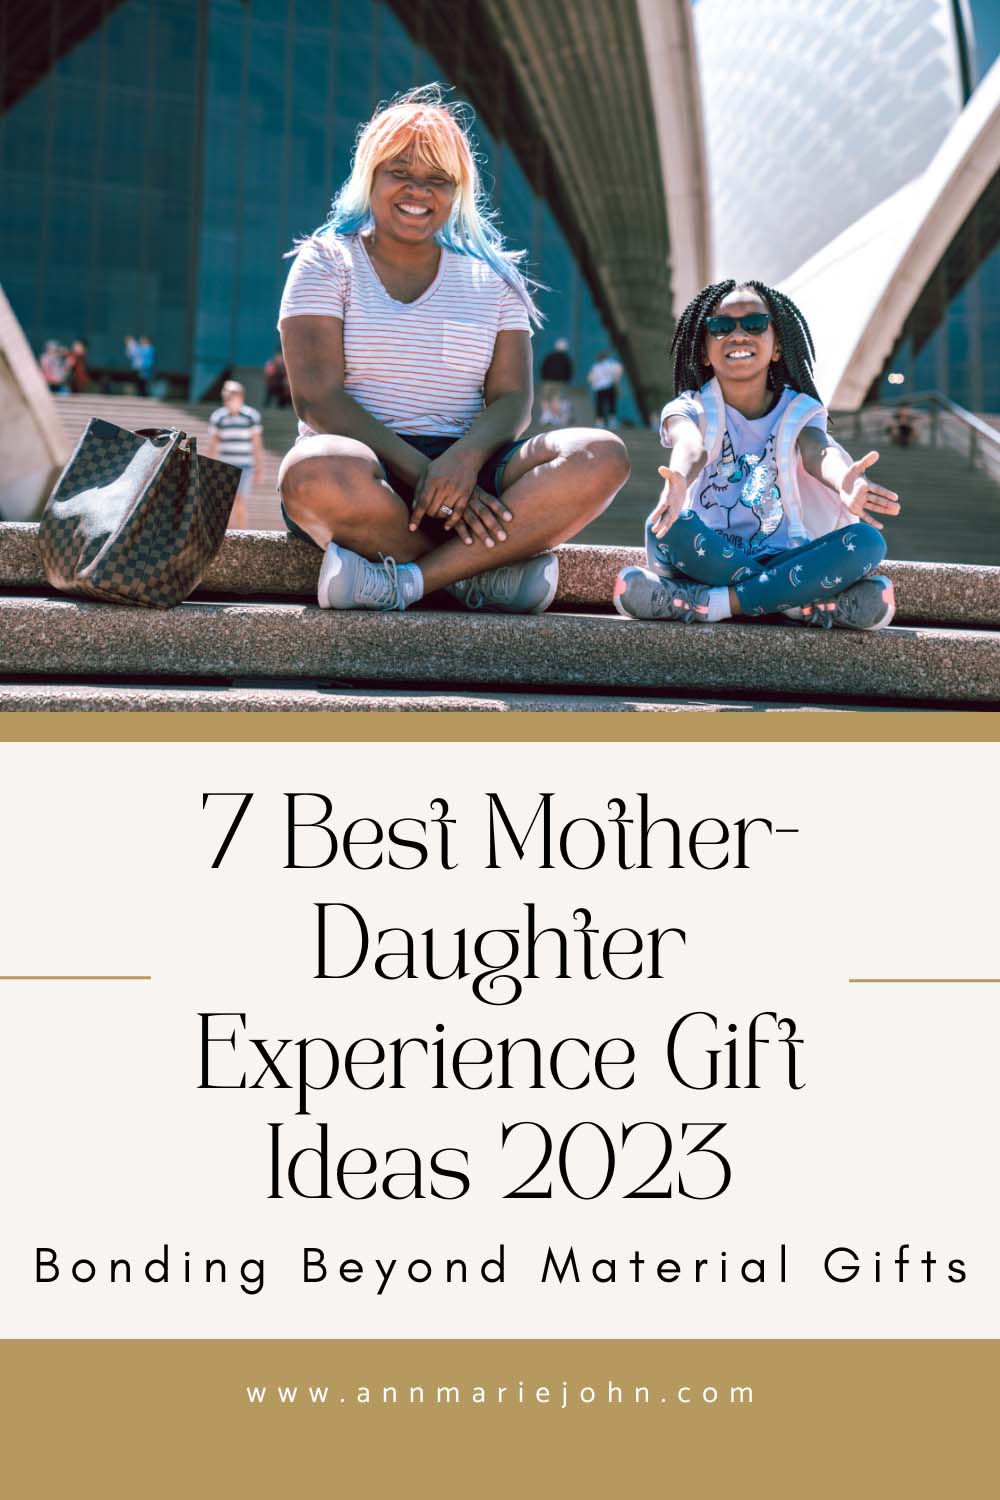 Best Mother-Daughter Experience Gift Ideas